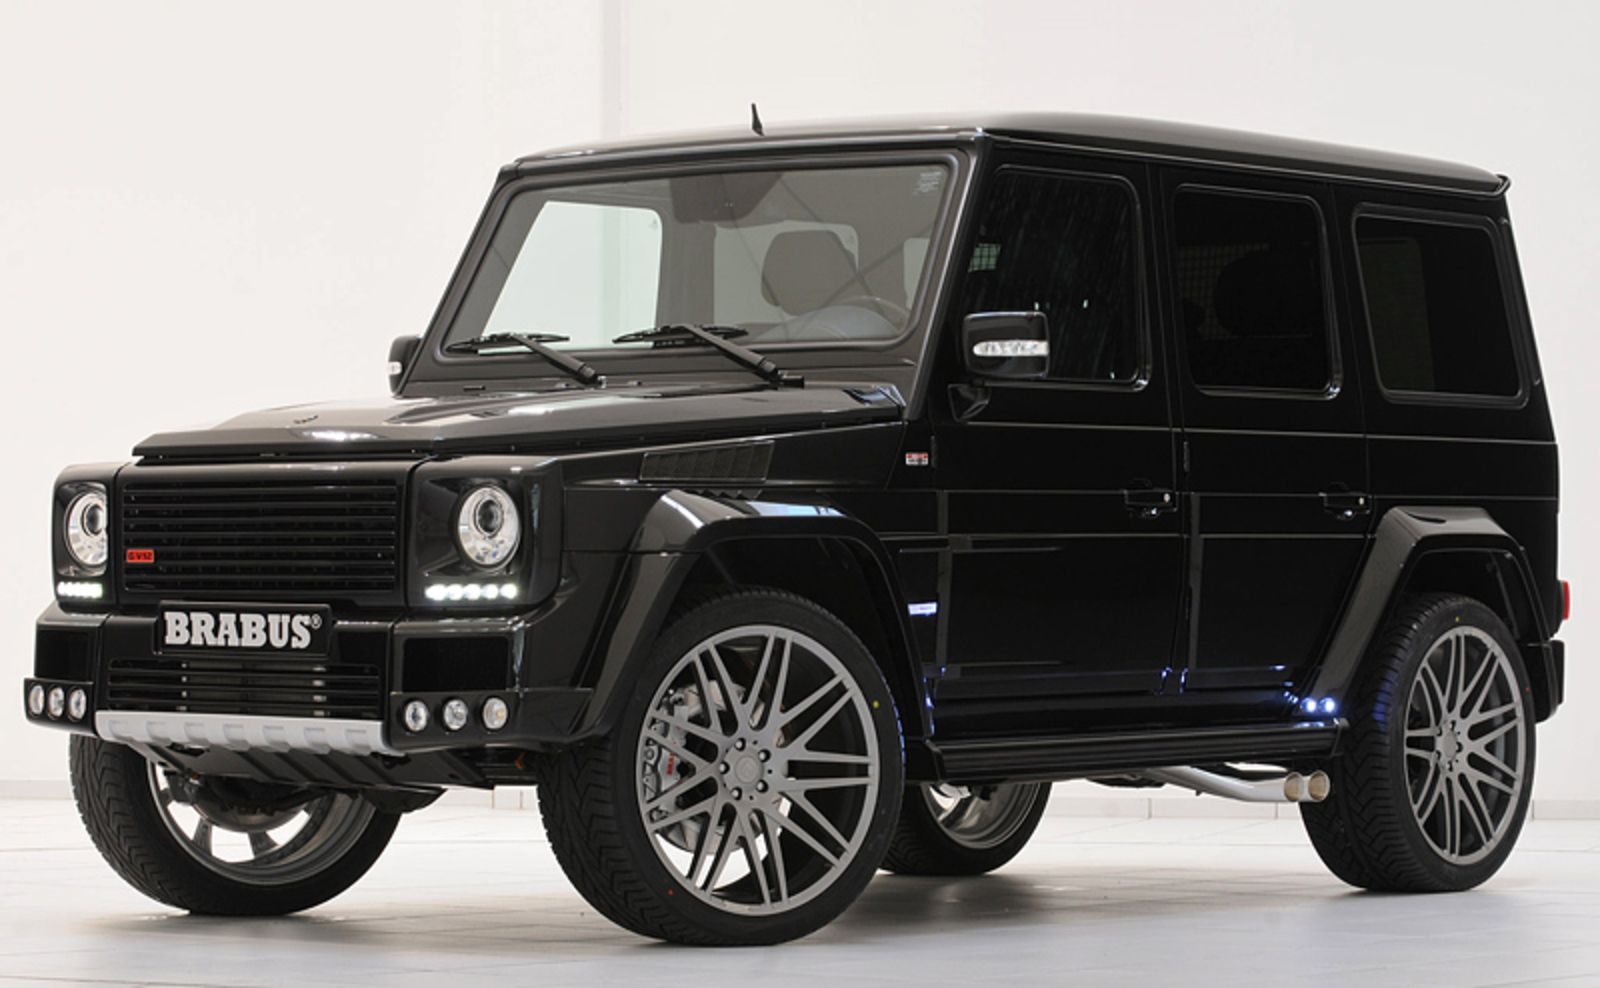 2011 Brabus G 800 Widestar - Specifications, Images, TOP Rating